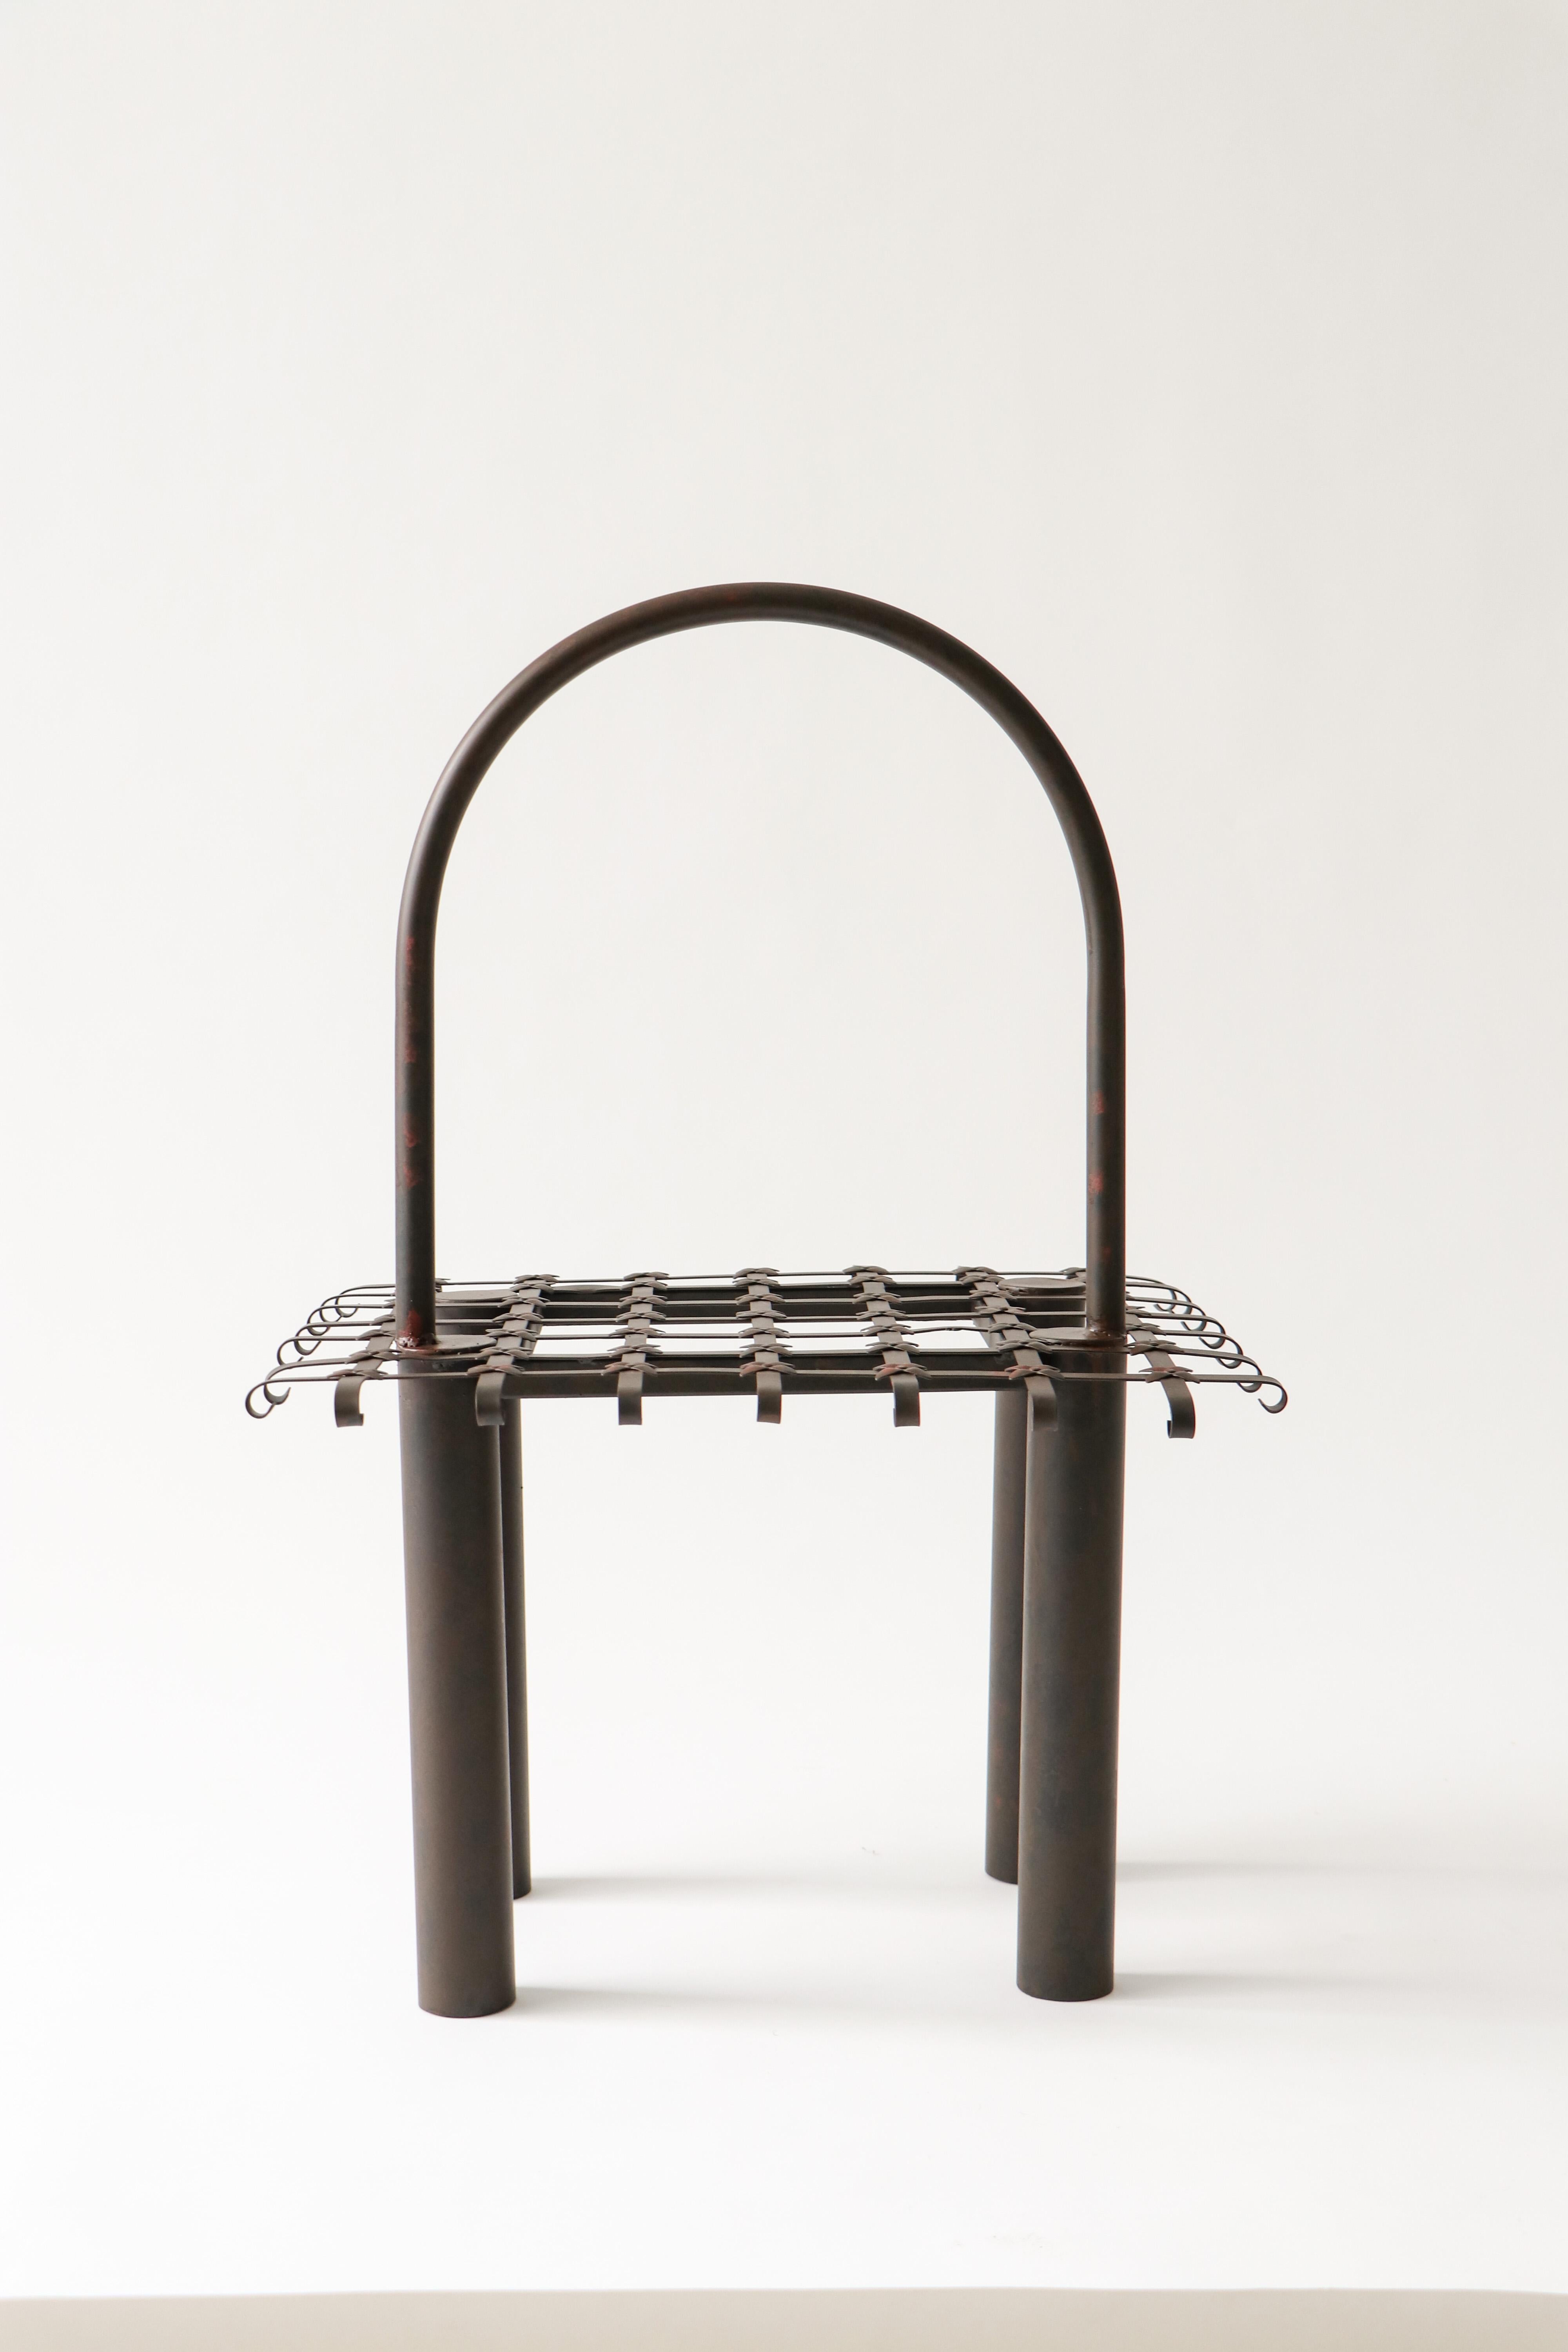 Escenario Mediterráneo is a collection that evokes the land of the designer, using handcrafted wrought iron as the only material, the creator shows the love for iron craftsmanship in the two collection objects: a low chair and a basket.

The low